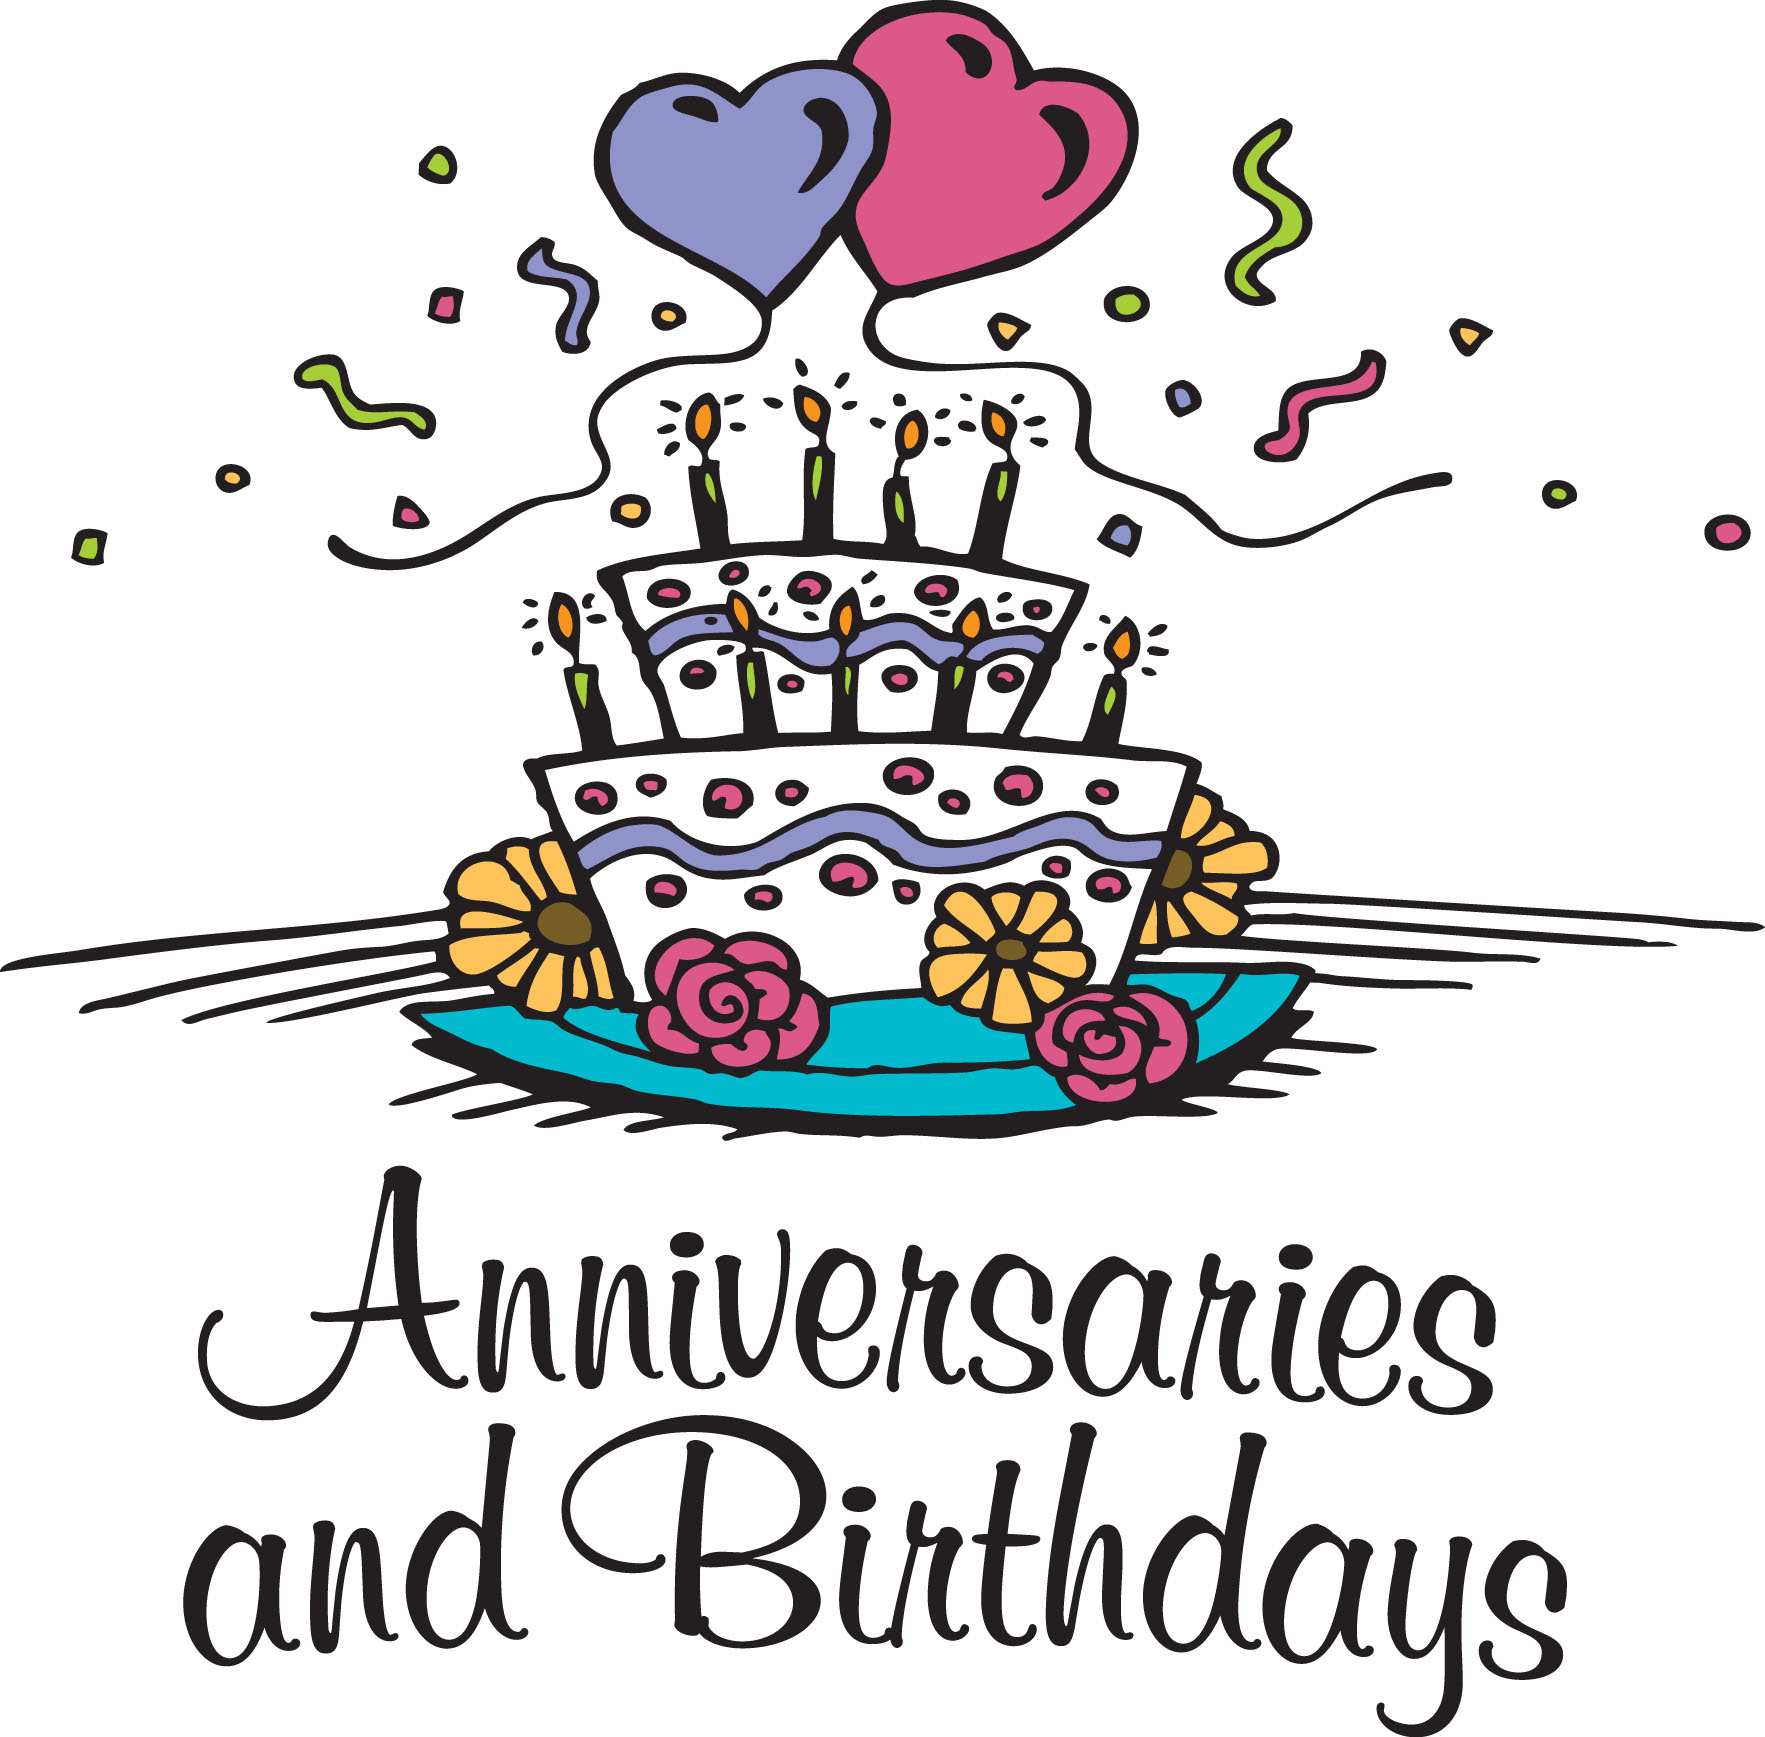 The Birthdays and Anniversaries Page for February